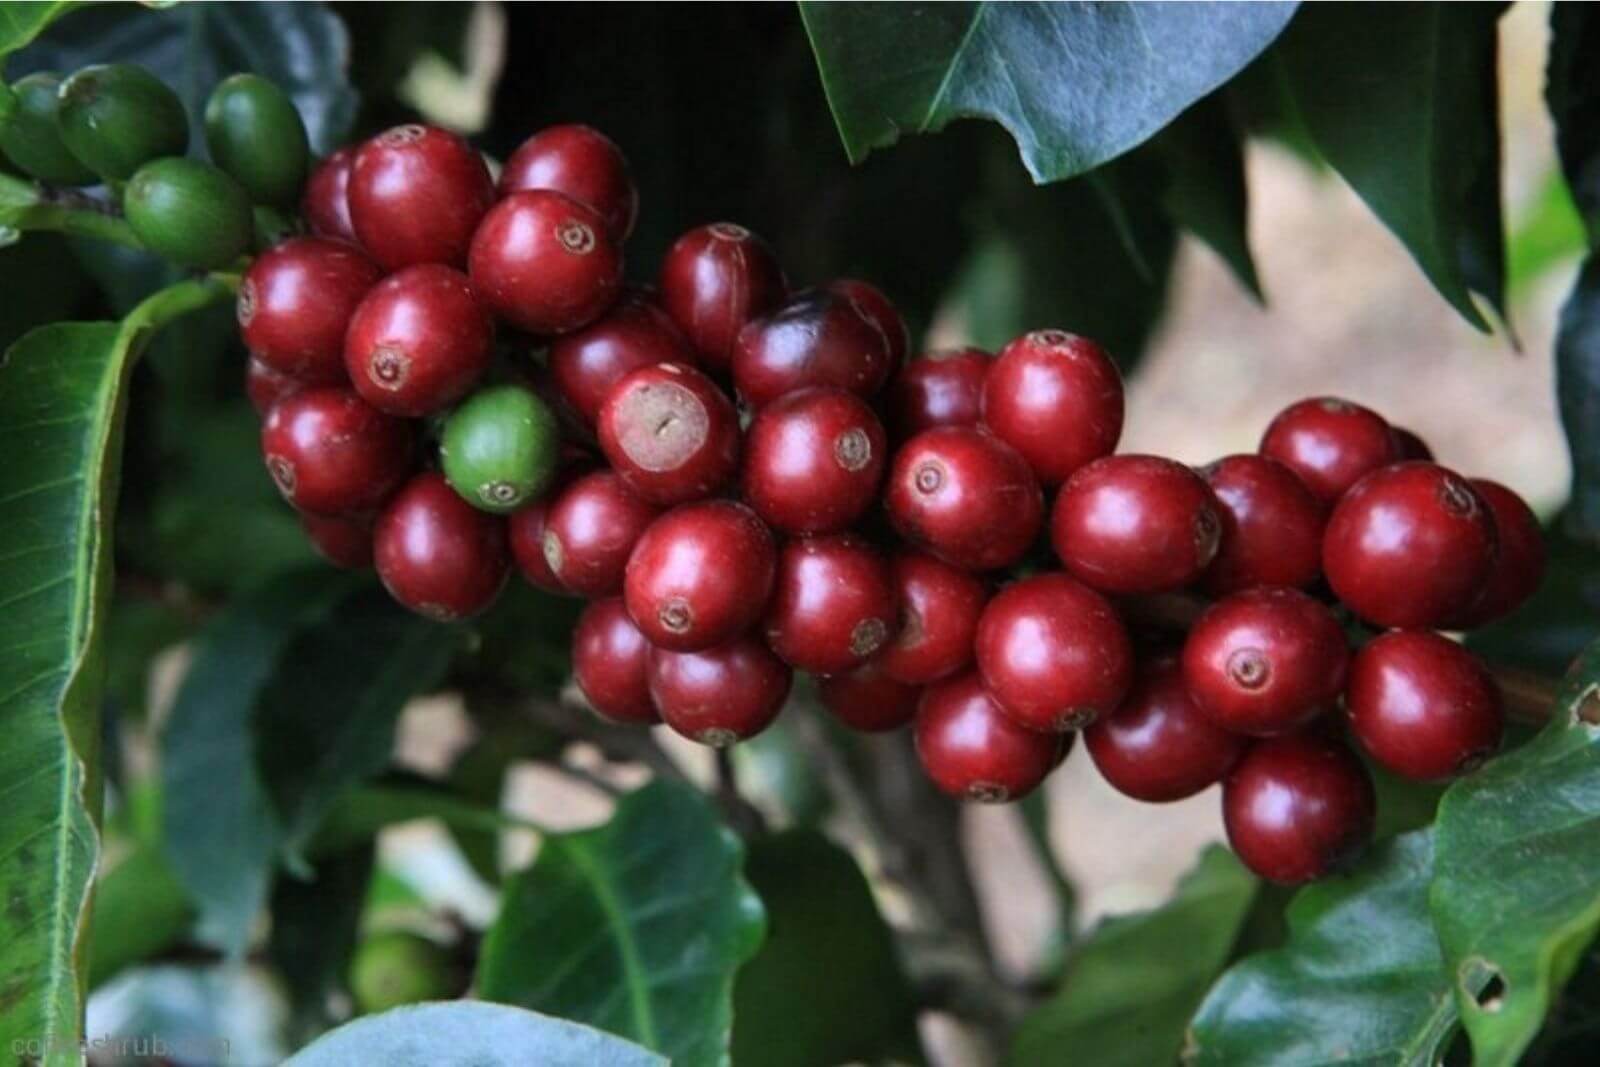 robusta-is-more-sensitive-to-climate-change